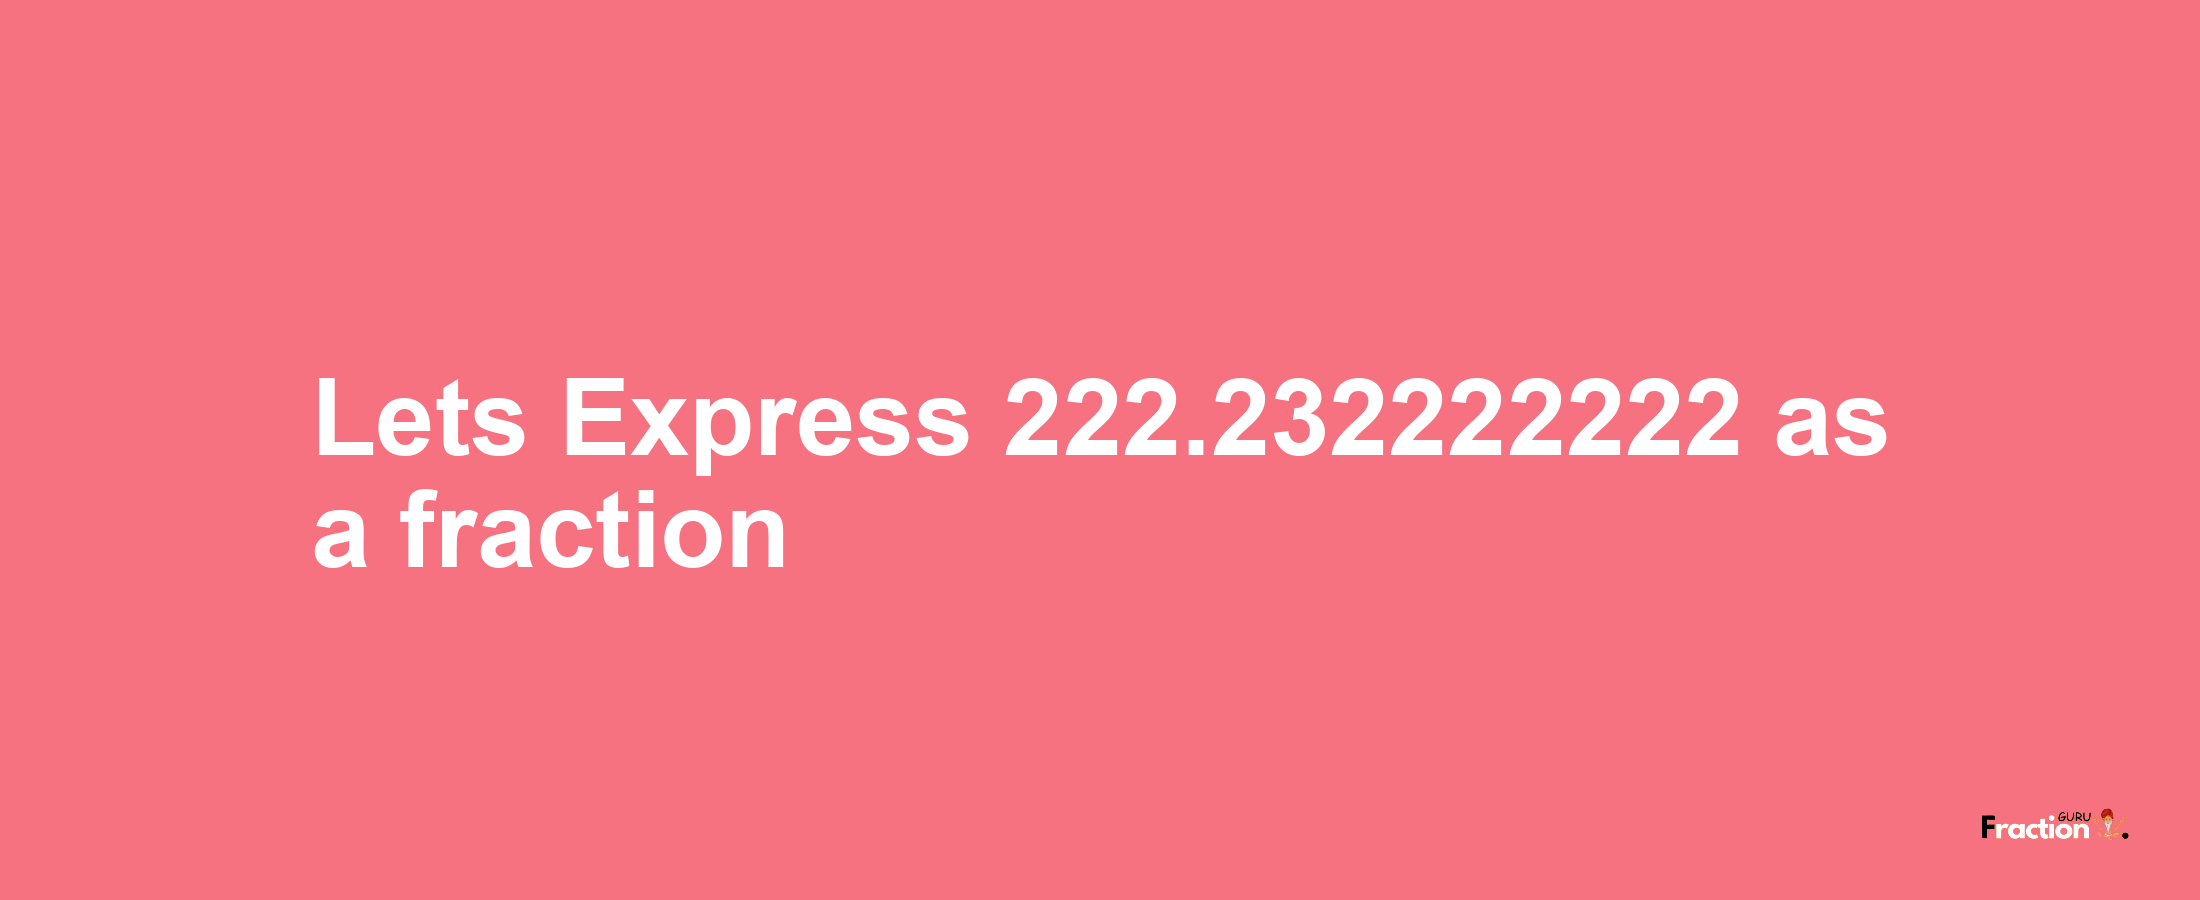 Lets Express 222.232222222 as afraction